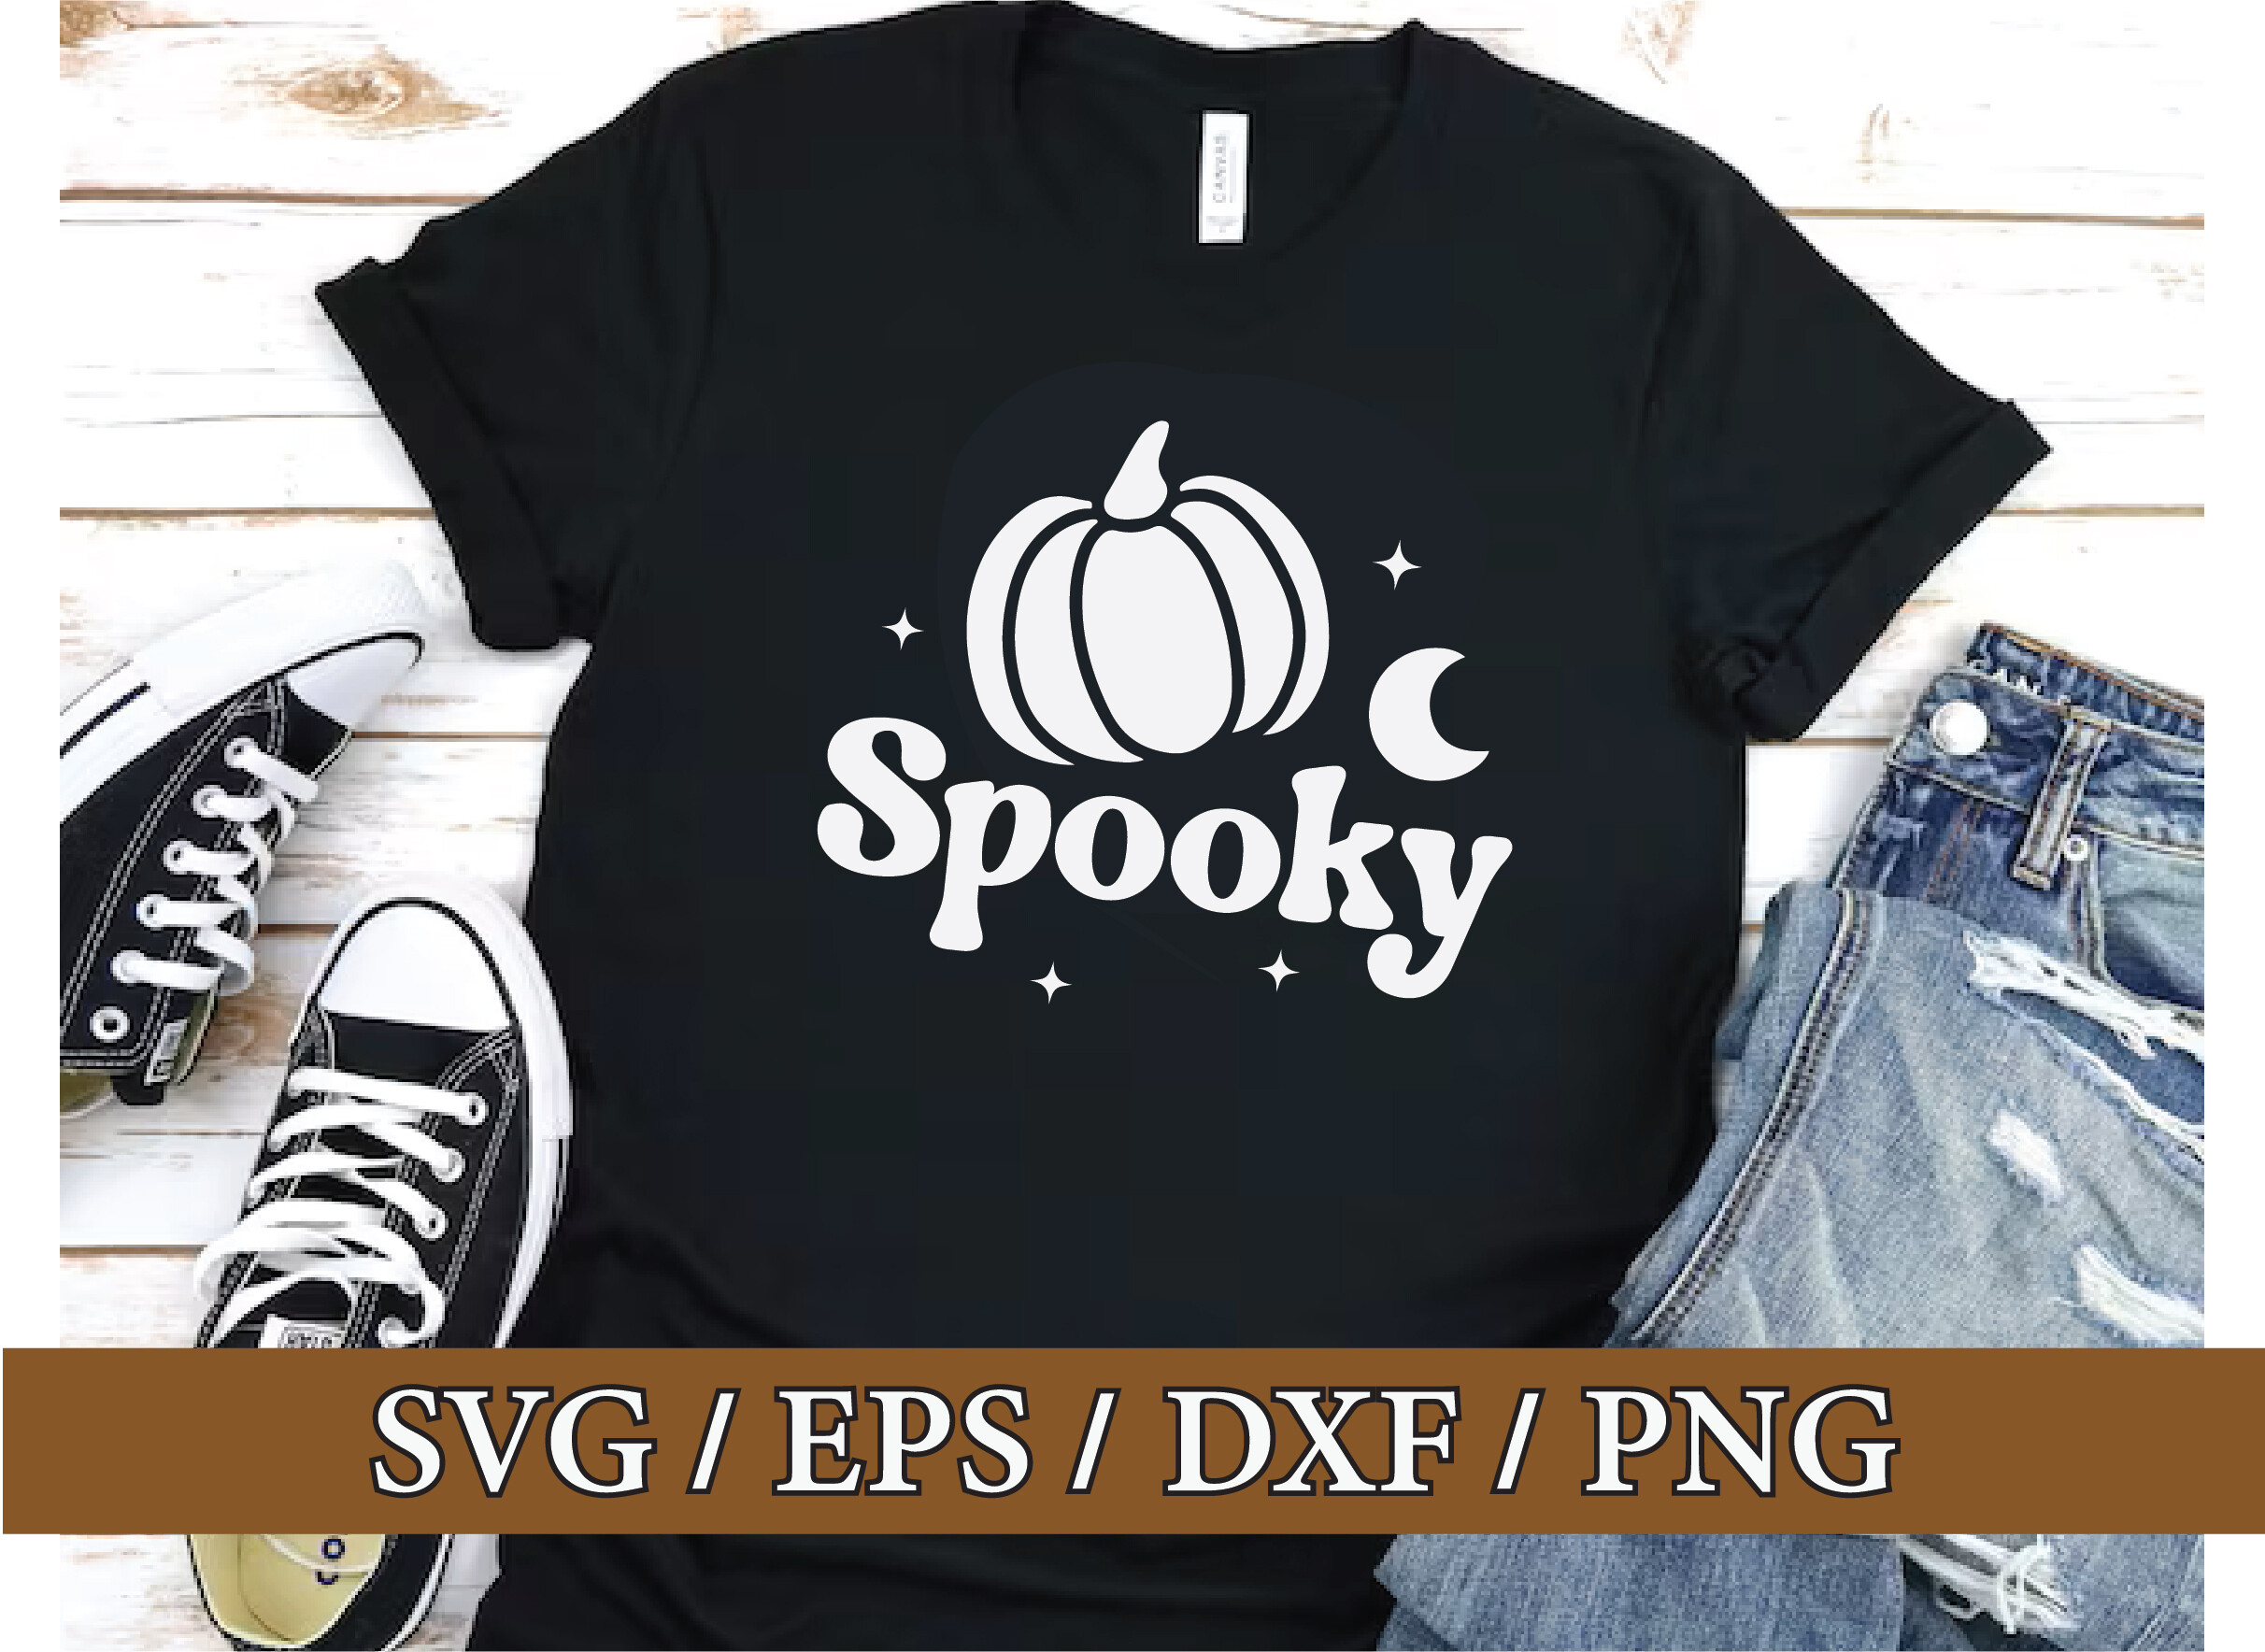 Spooky Svg File, Halloween Svg Bundle Graphic by Nigel Store · Creative ...